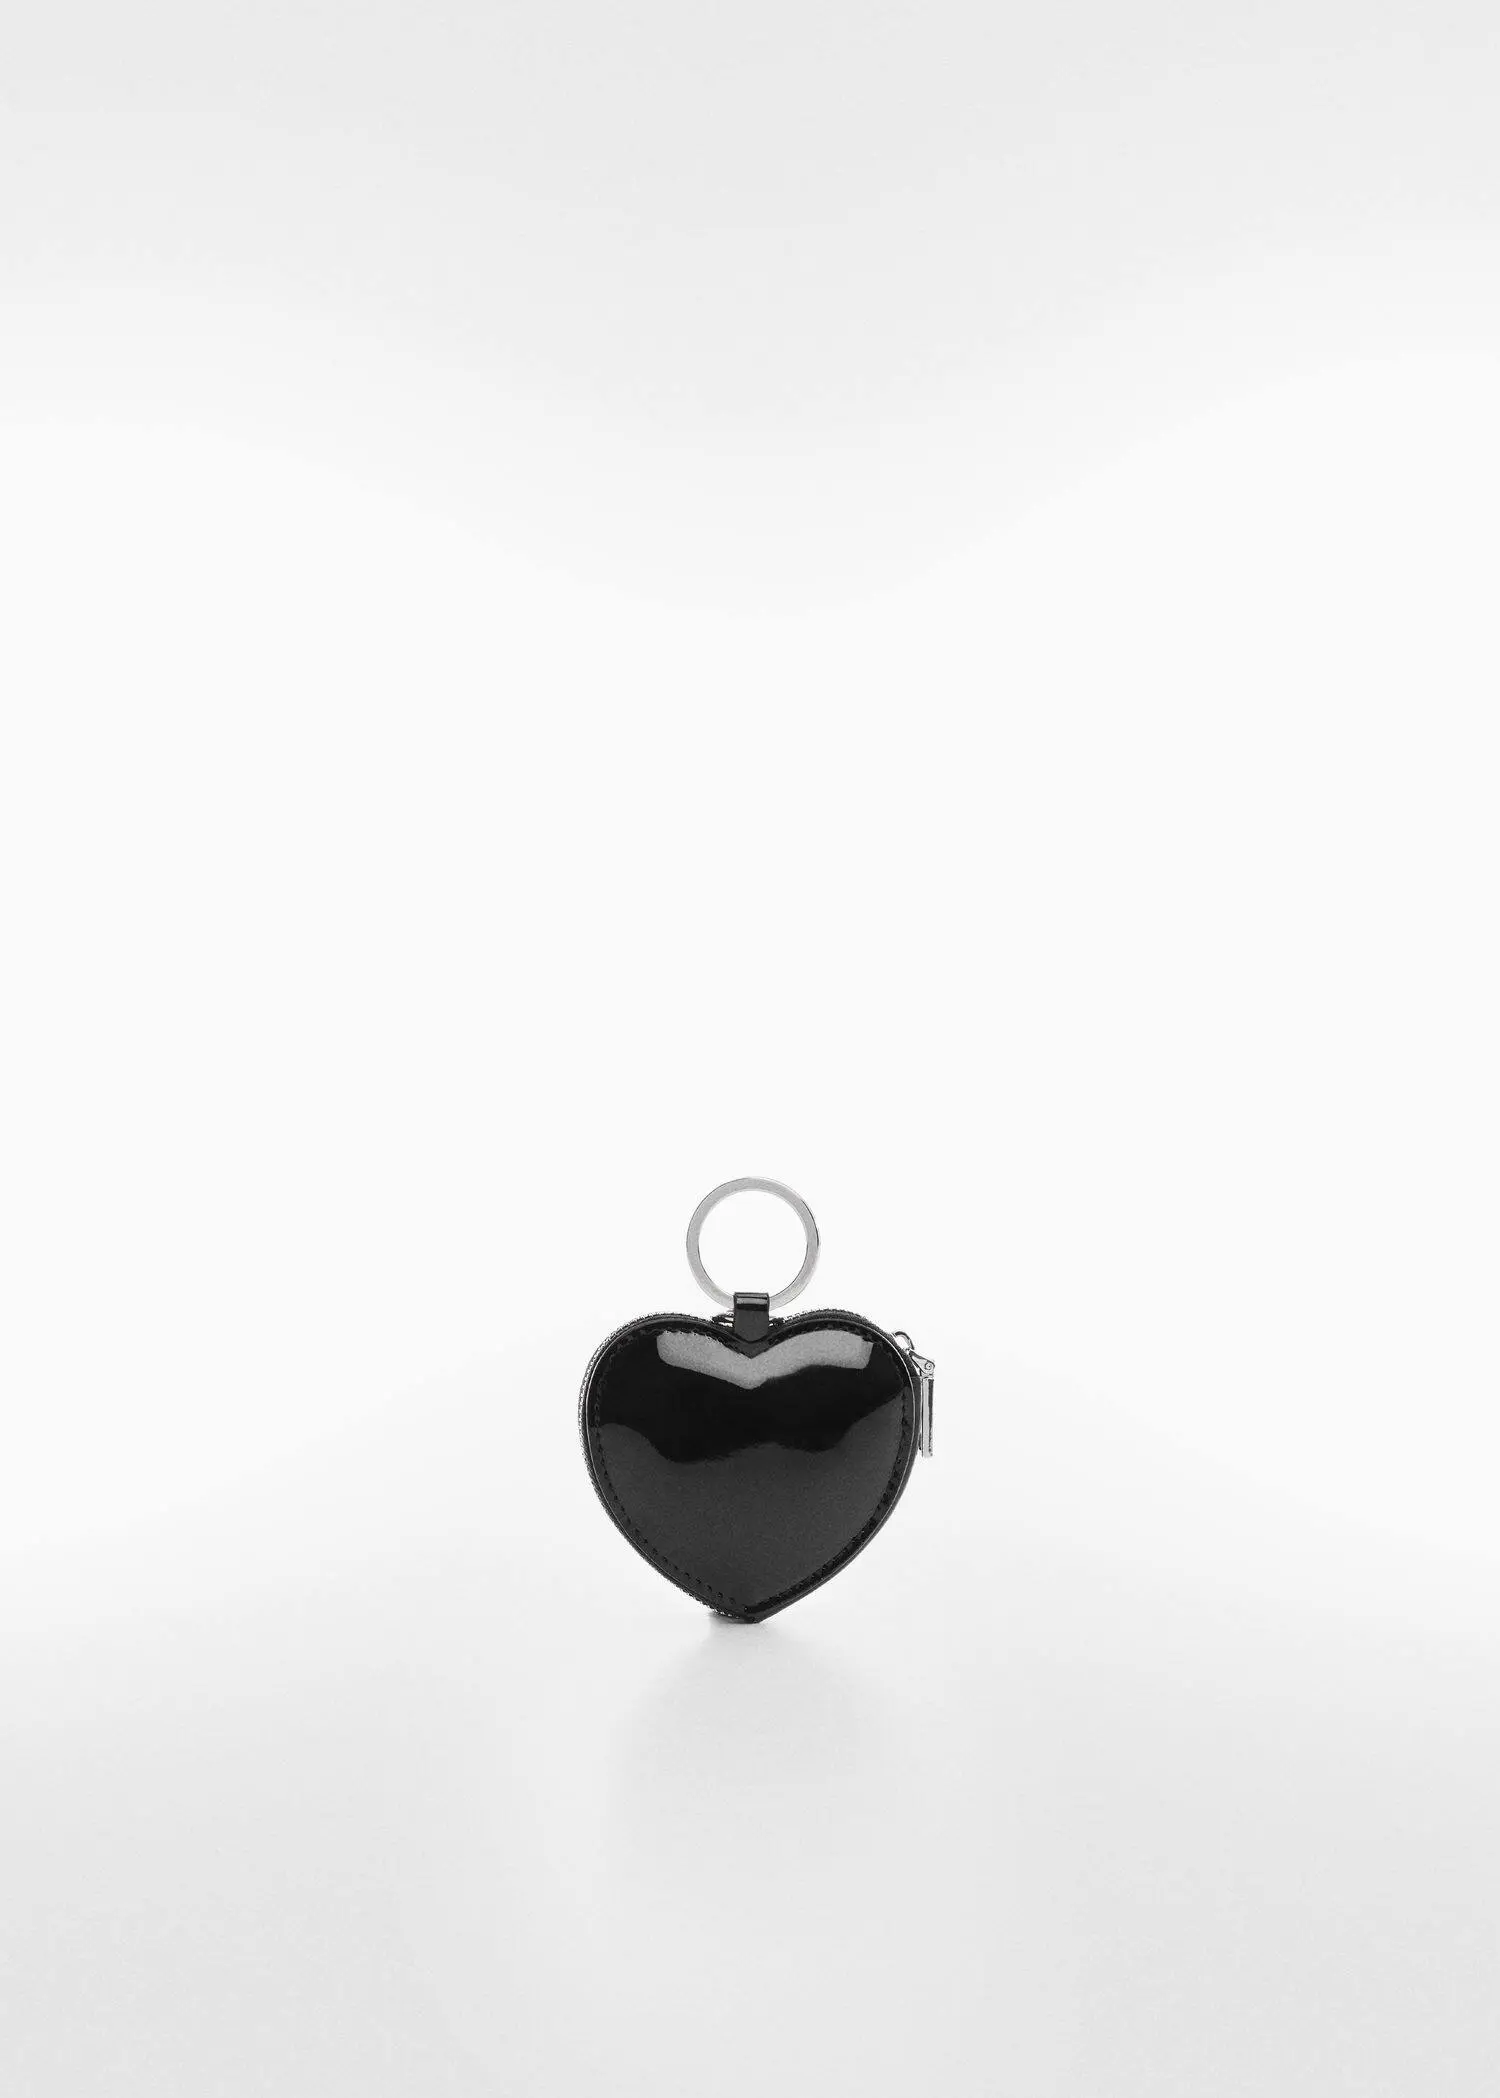 Mango Wallet with heart keychain . 3